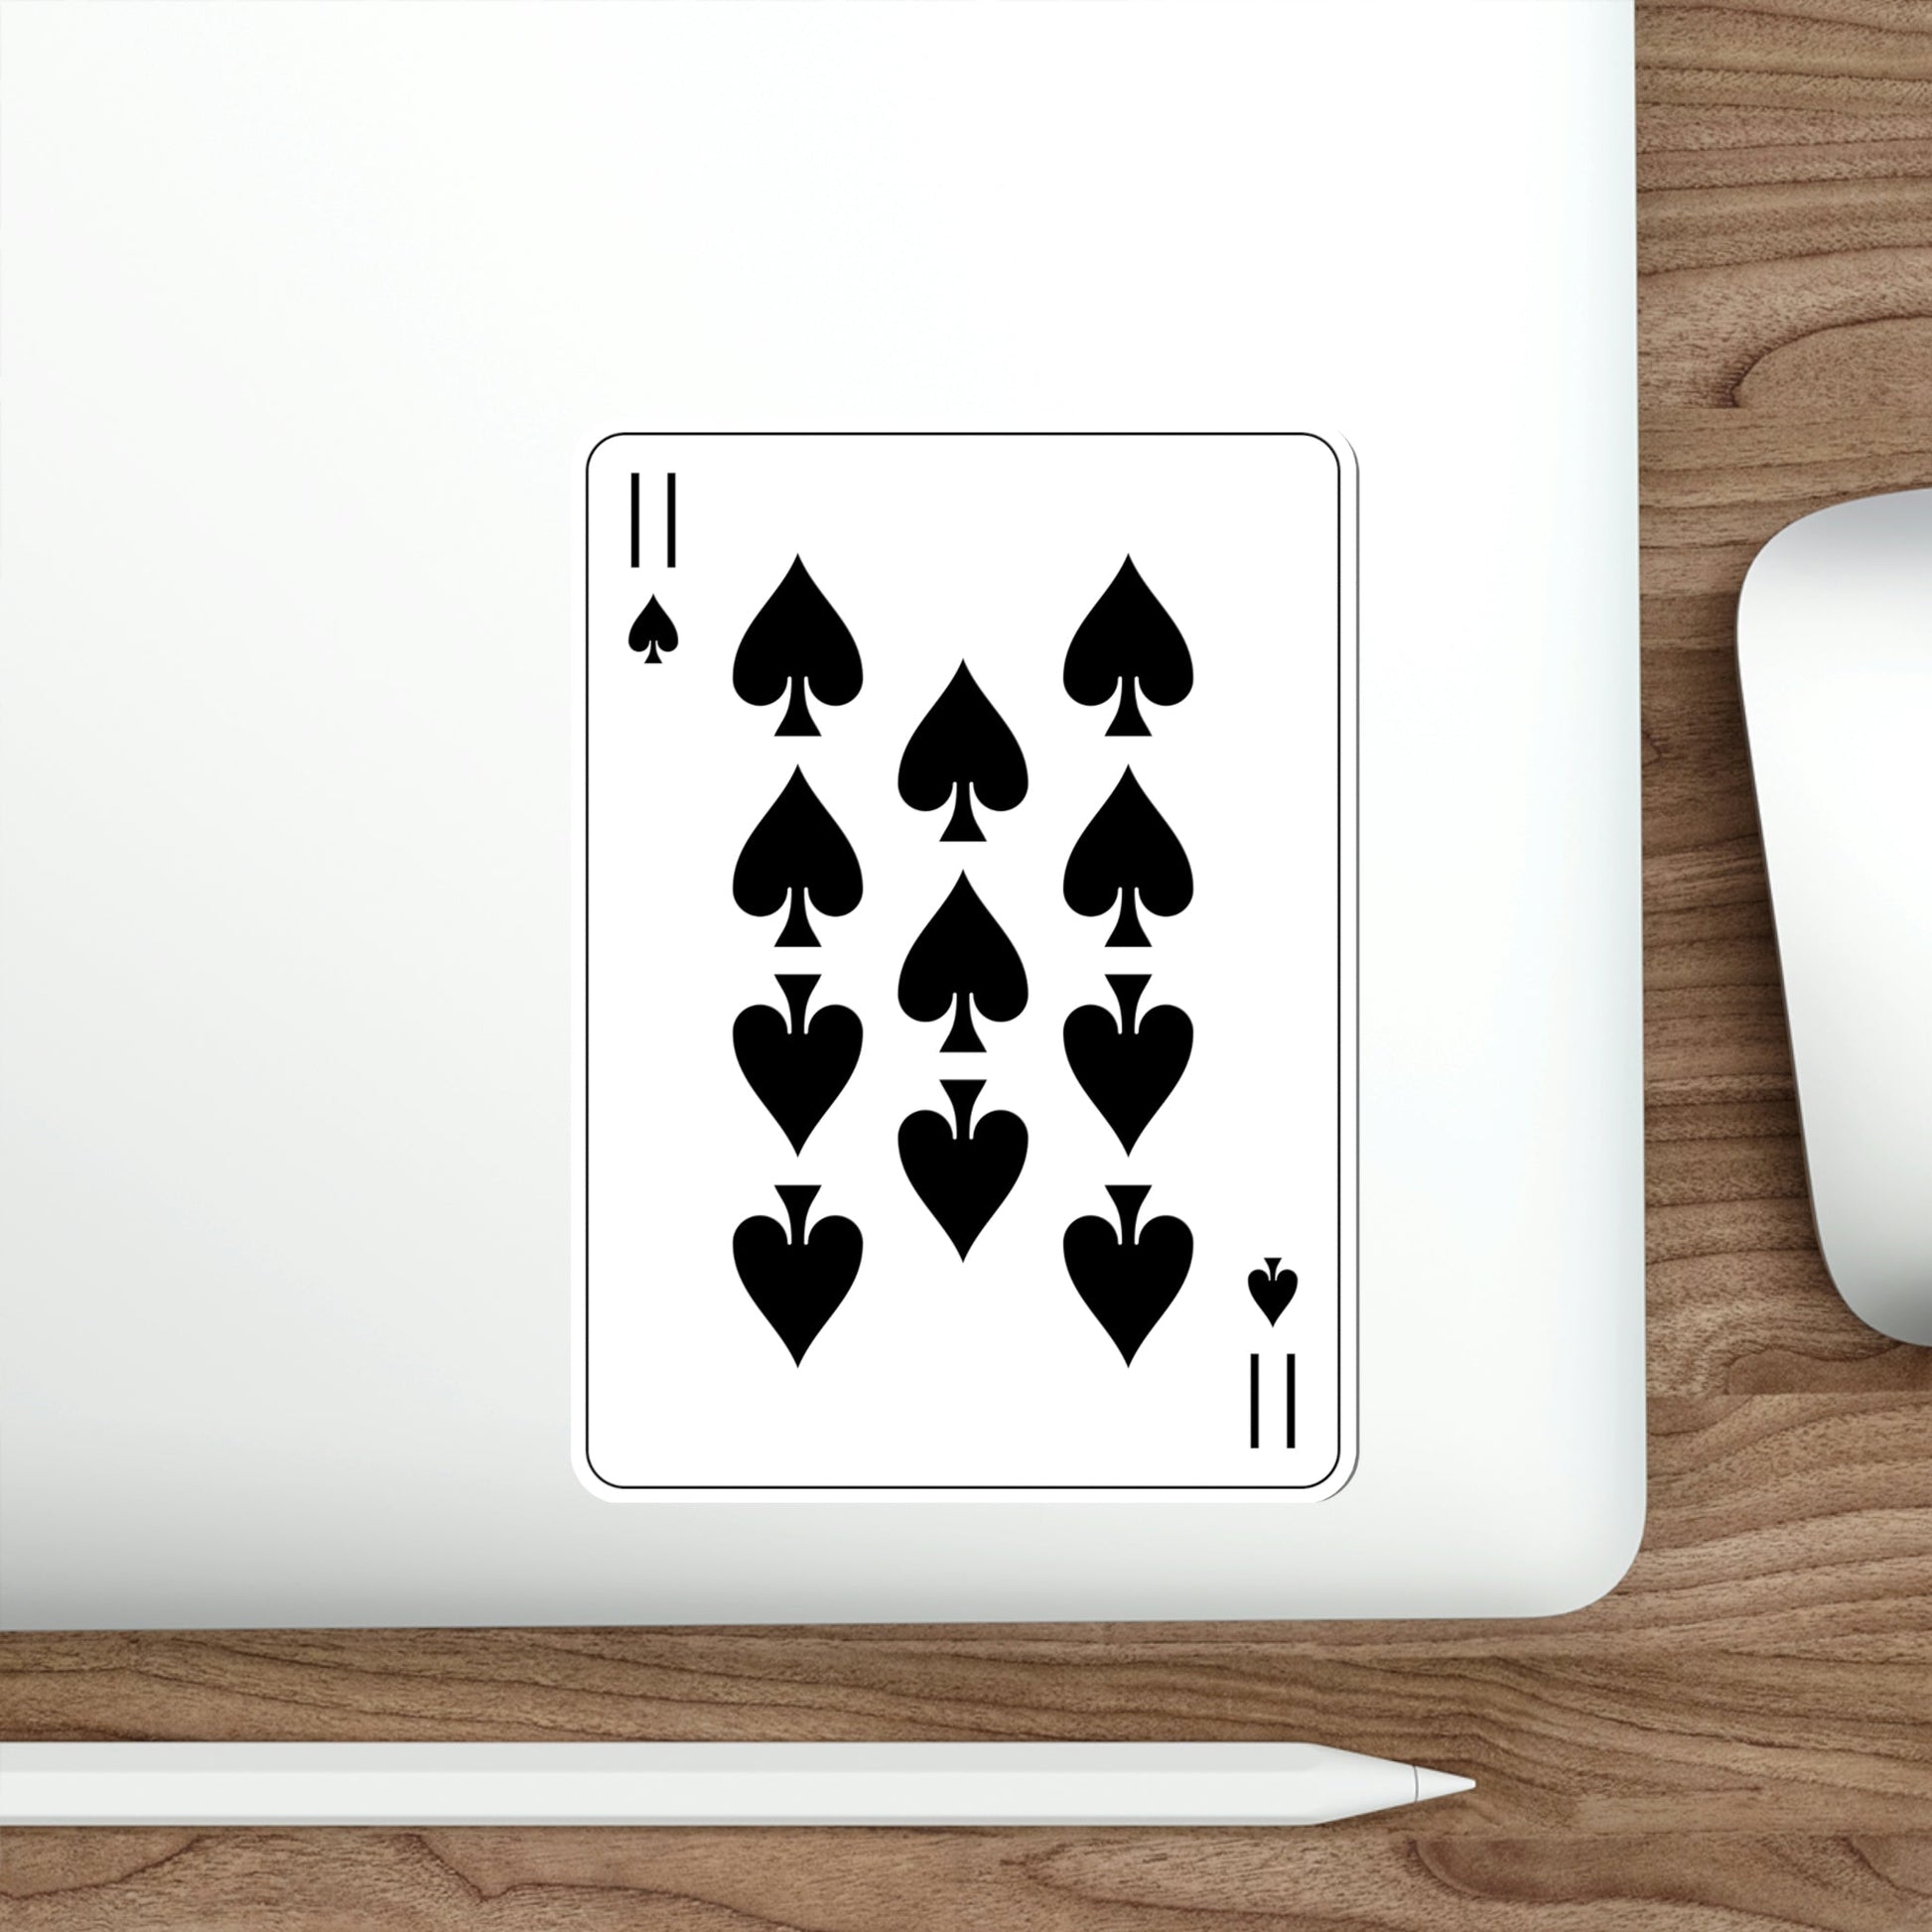 11 of Spades Playing Card STICKER Vinyl Die-Cut Decal-The Sticker Space